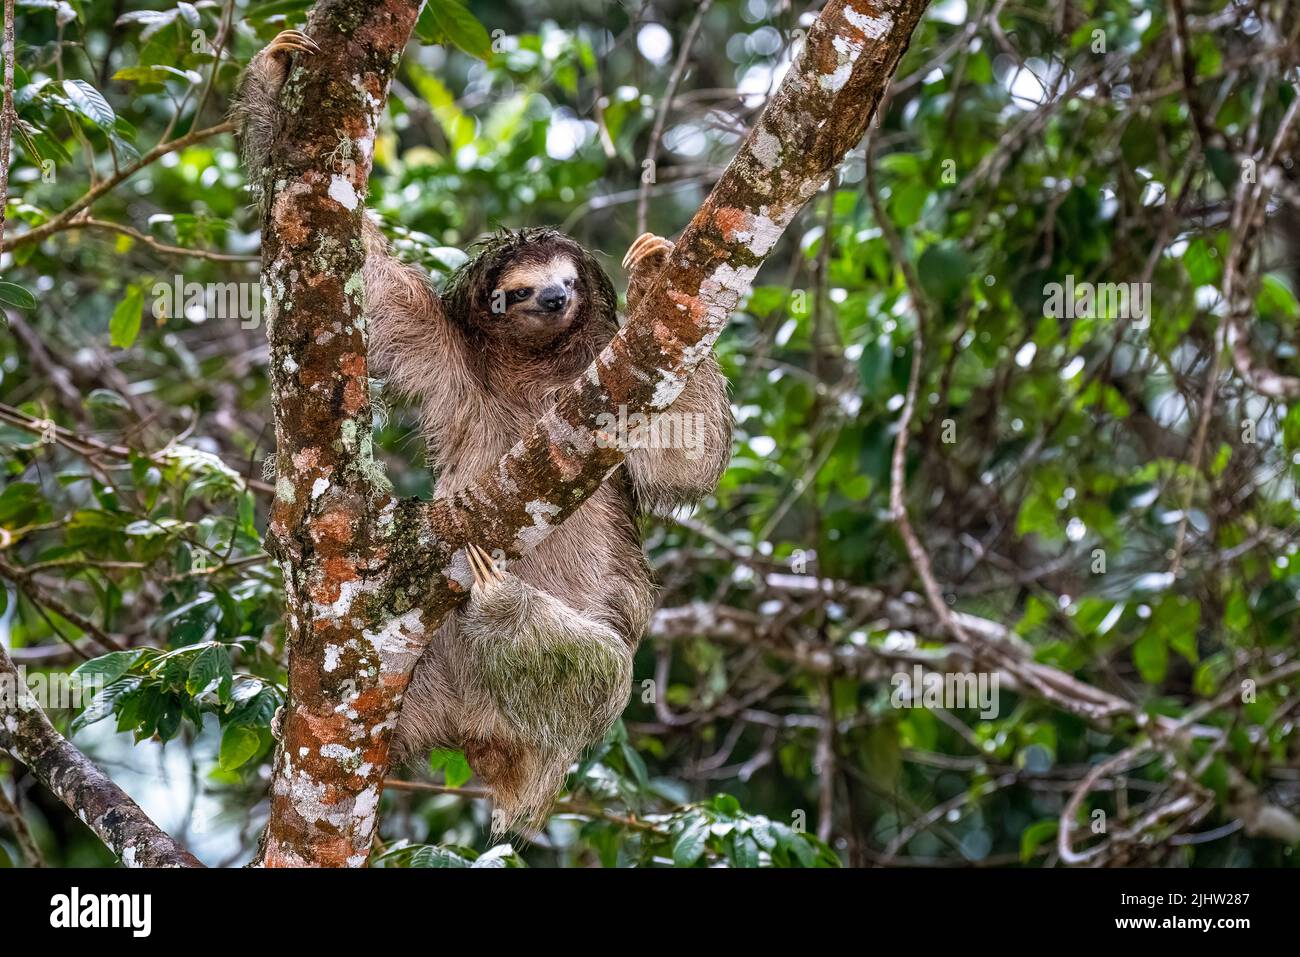 3 toed sloth hurt in one eye Stock Photo